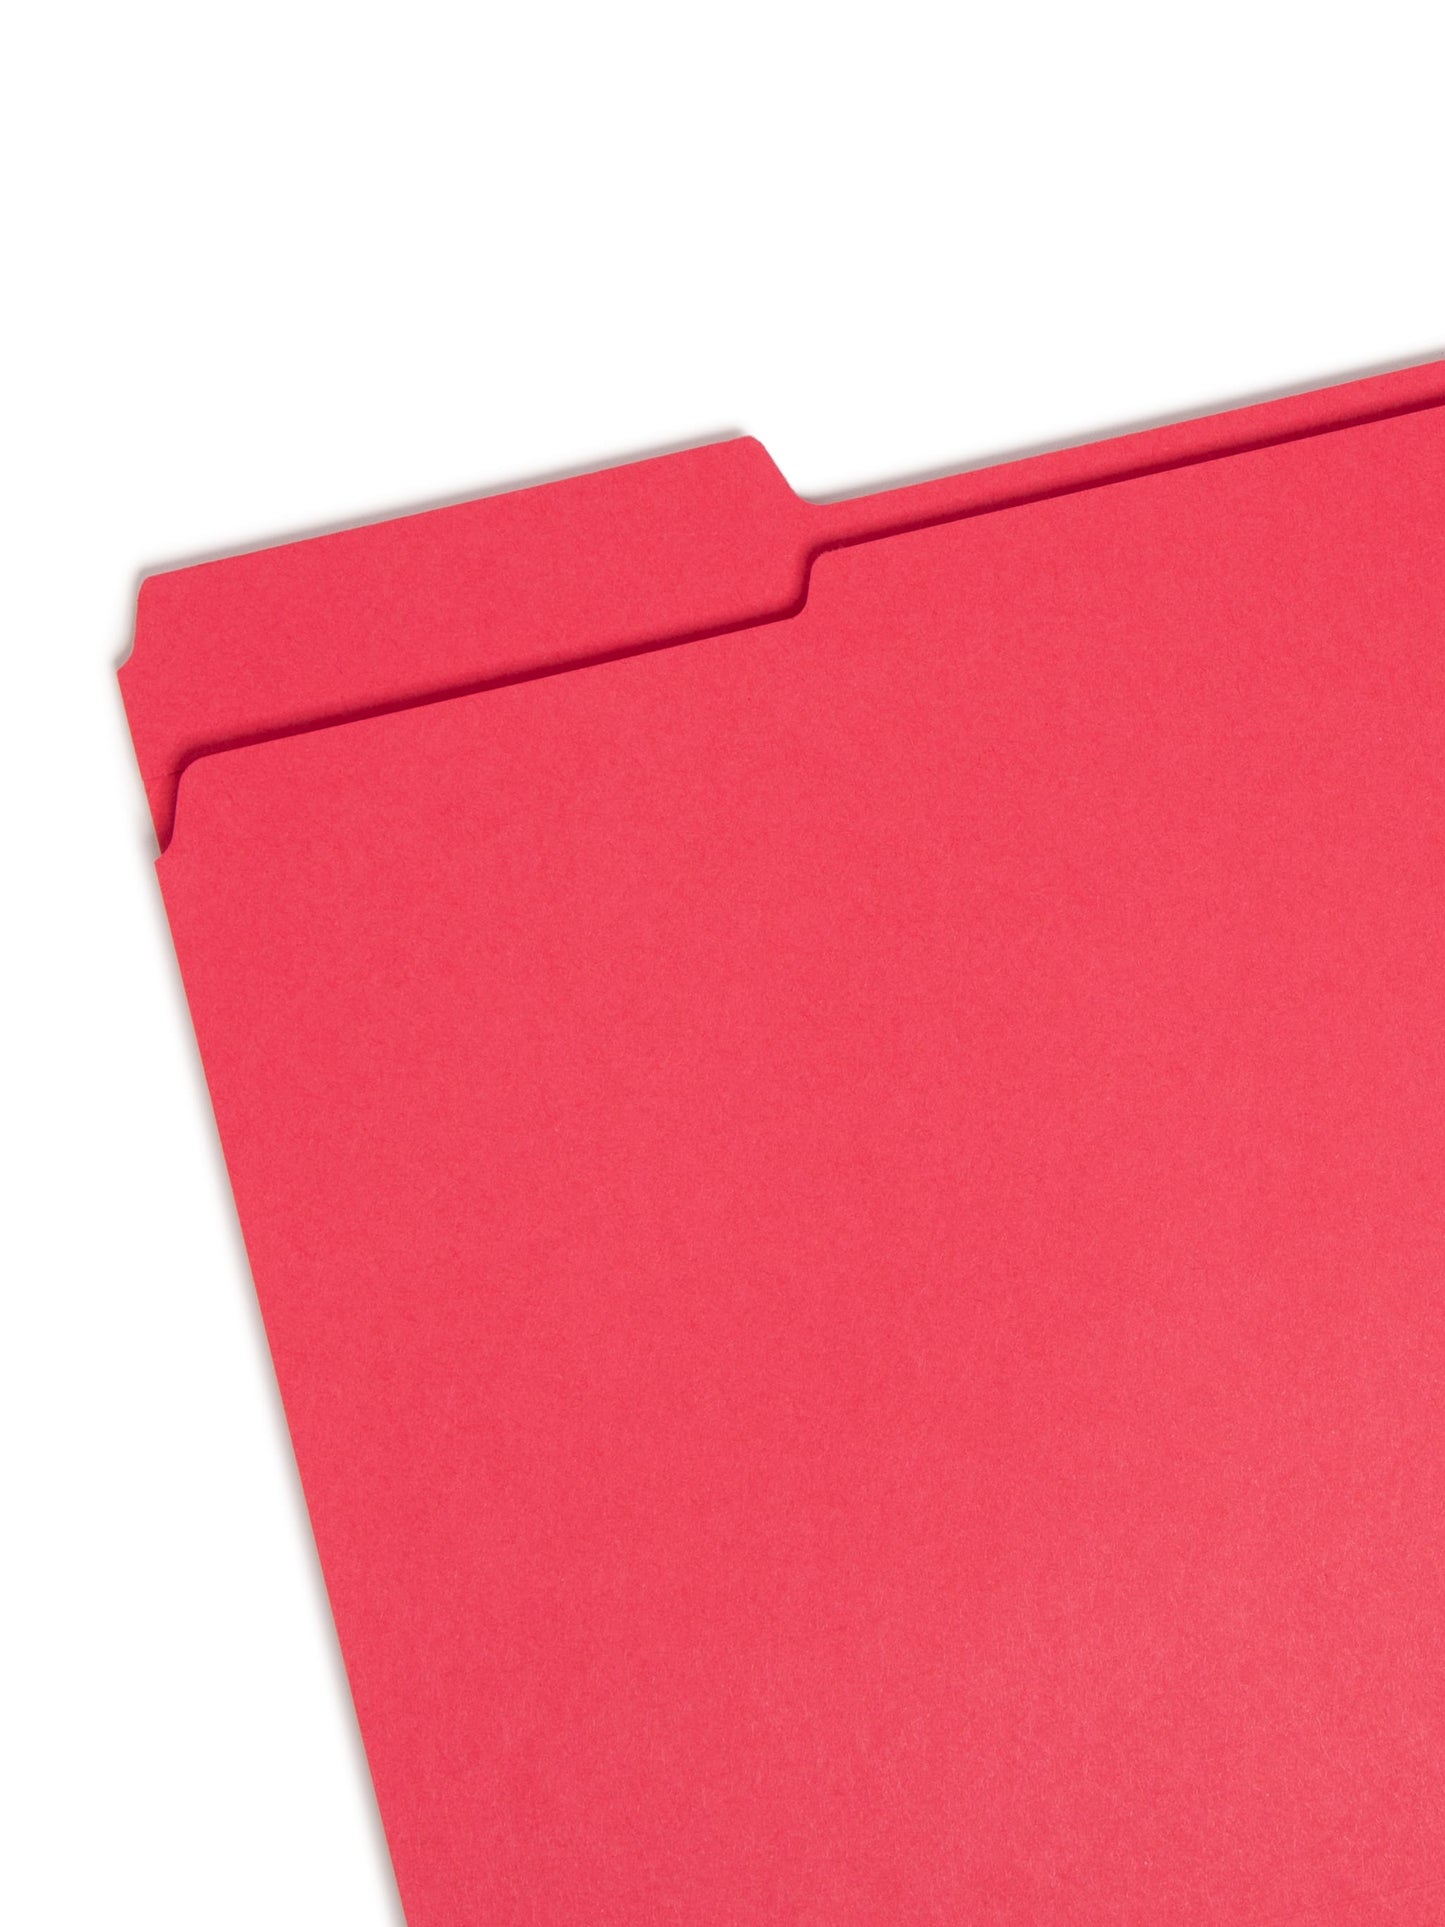 Reinforced Tab File Folders, 1/3-Cut Tab, Red Color, Letter Size, Set of 100, 086486127349